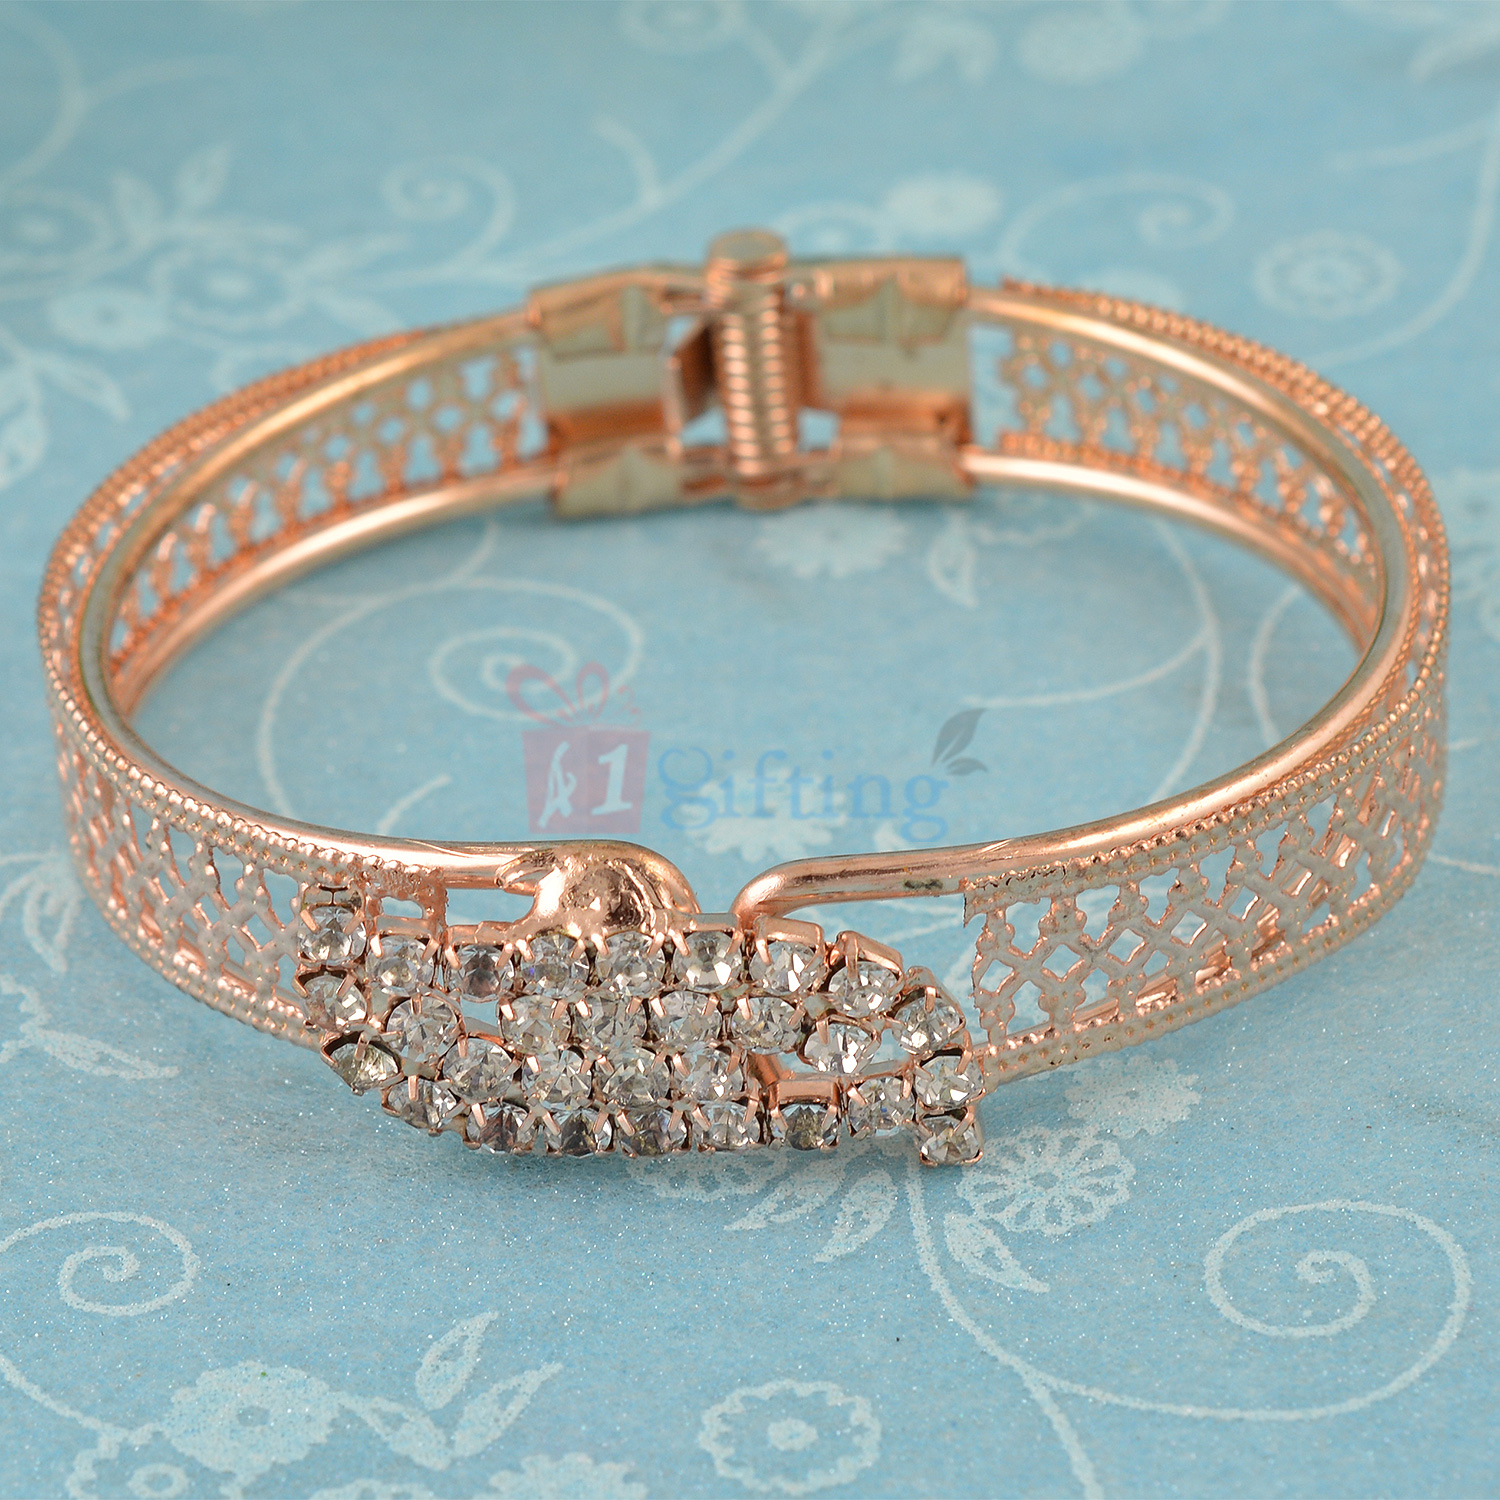 Meaning ful Charm Golden Silver Bracelet with Diamonds